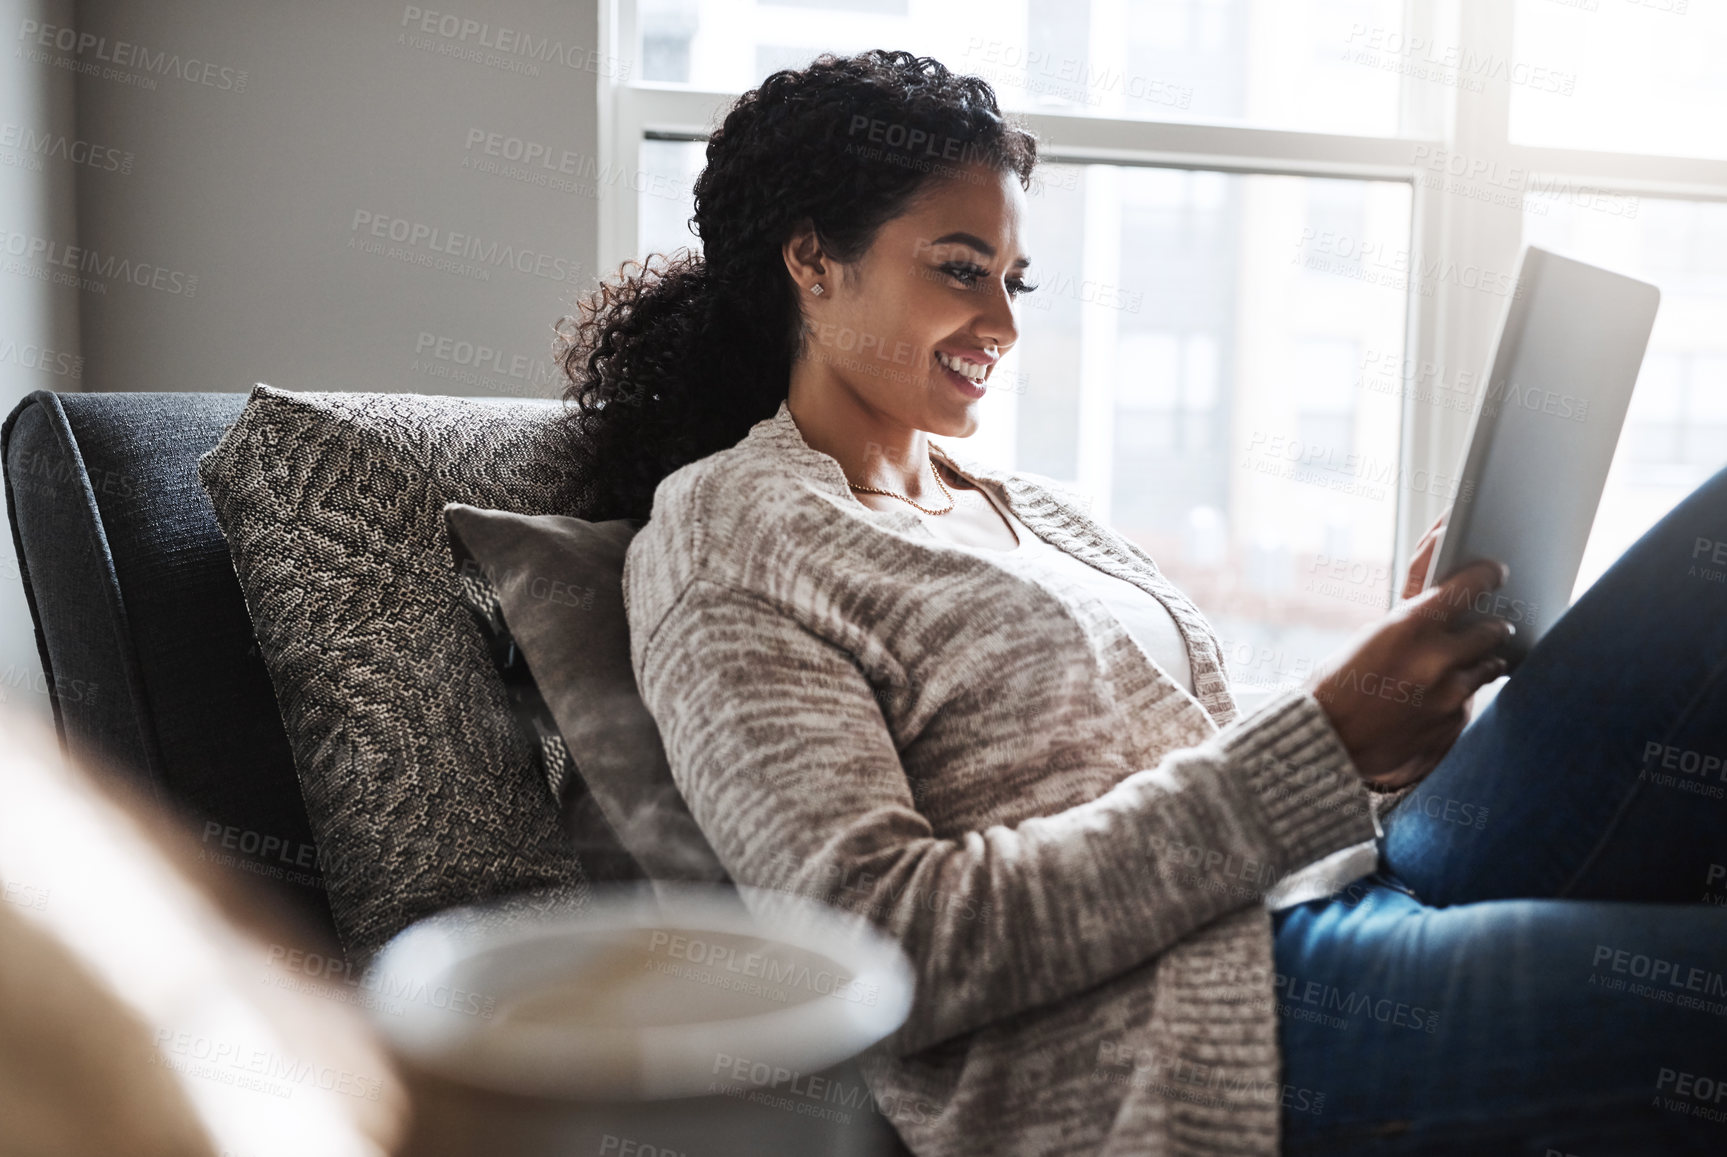 Buy stock photo Shot of a cheerful young woman relaxing on a chair while browsing on a digital tablet at home